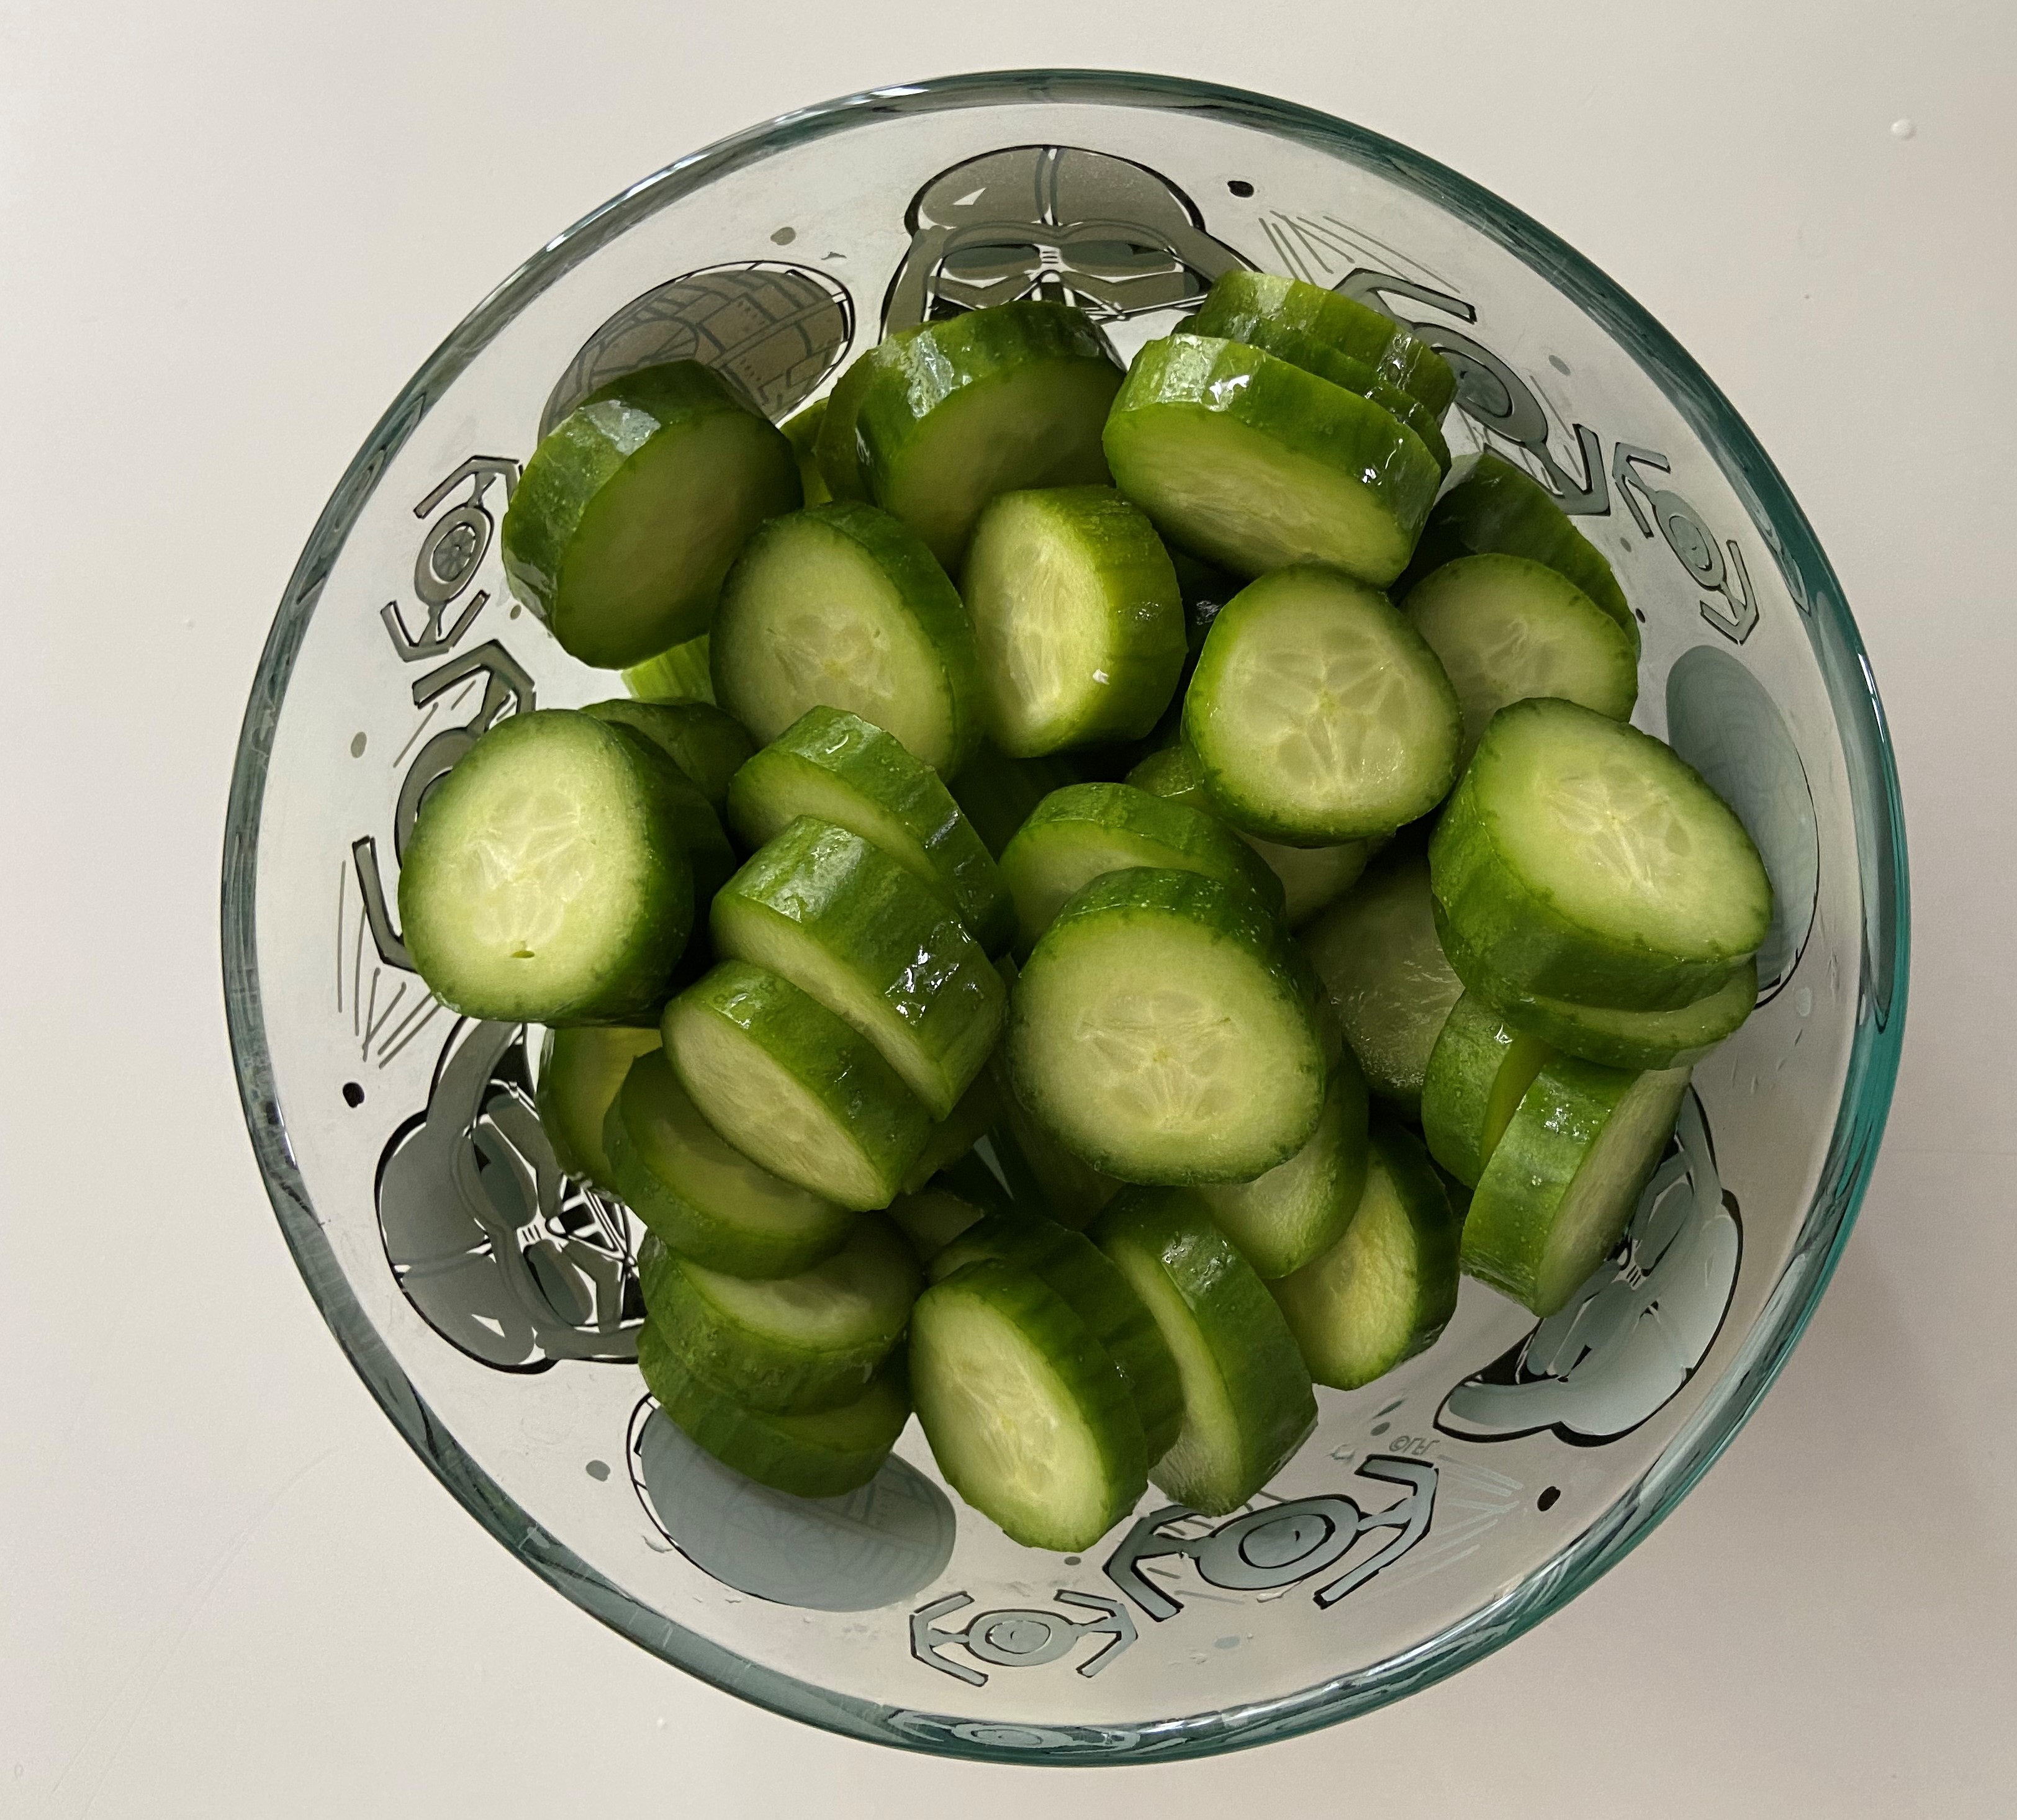 Cucumber Whole30 snack.